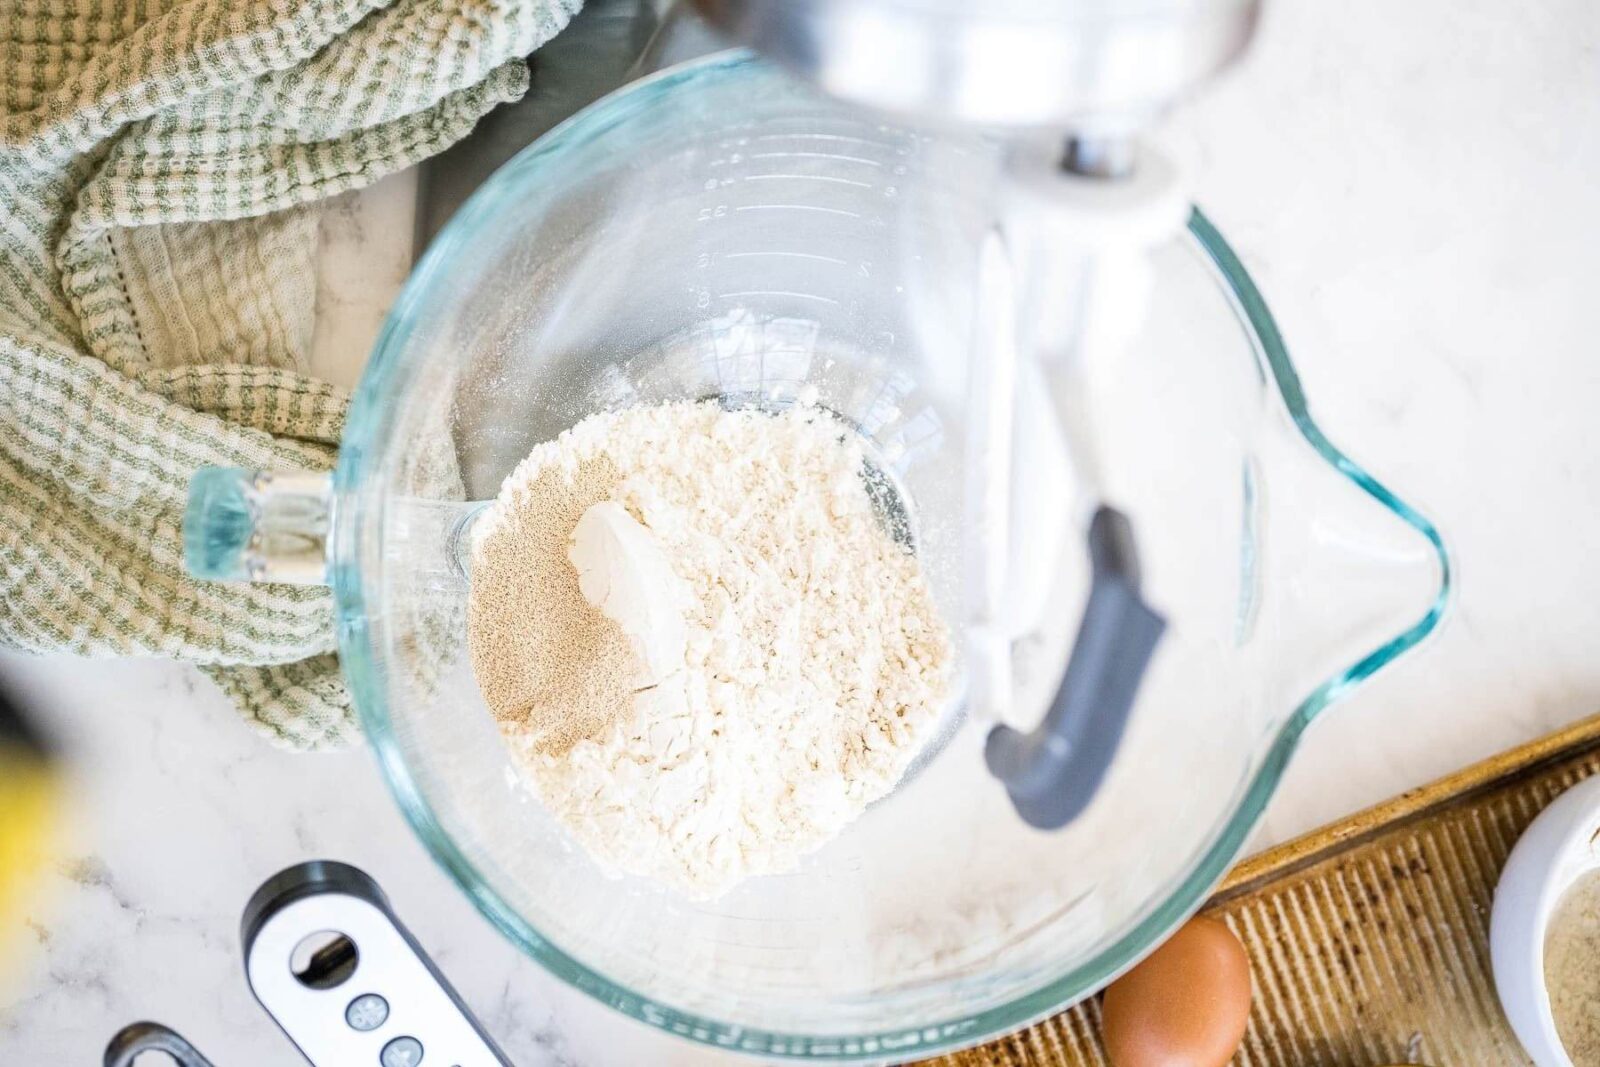 Bread flour sits in a glass mixing bowl with a stand mixer batter attachment above it.